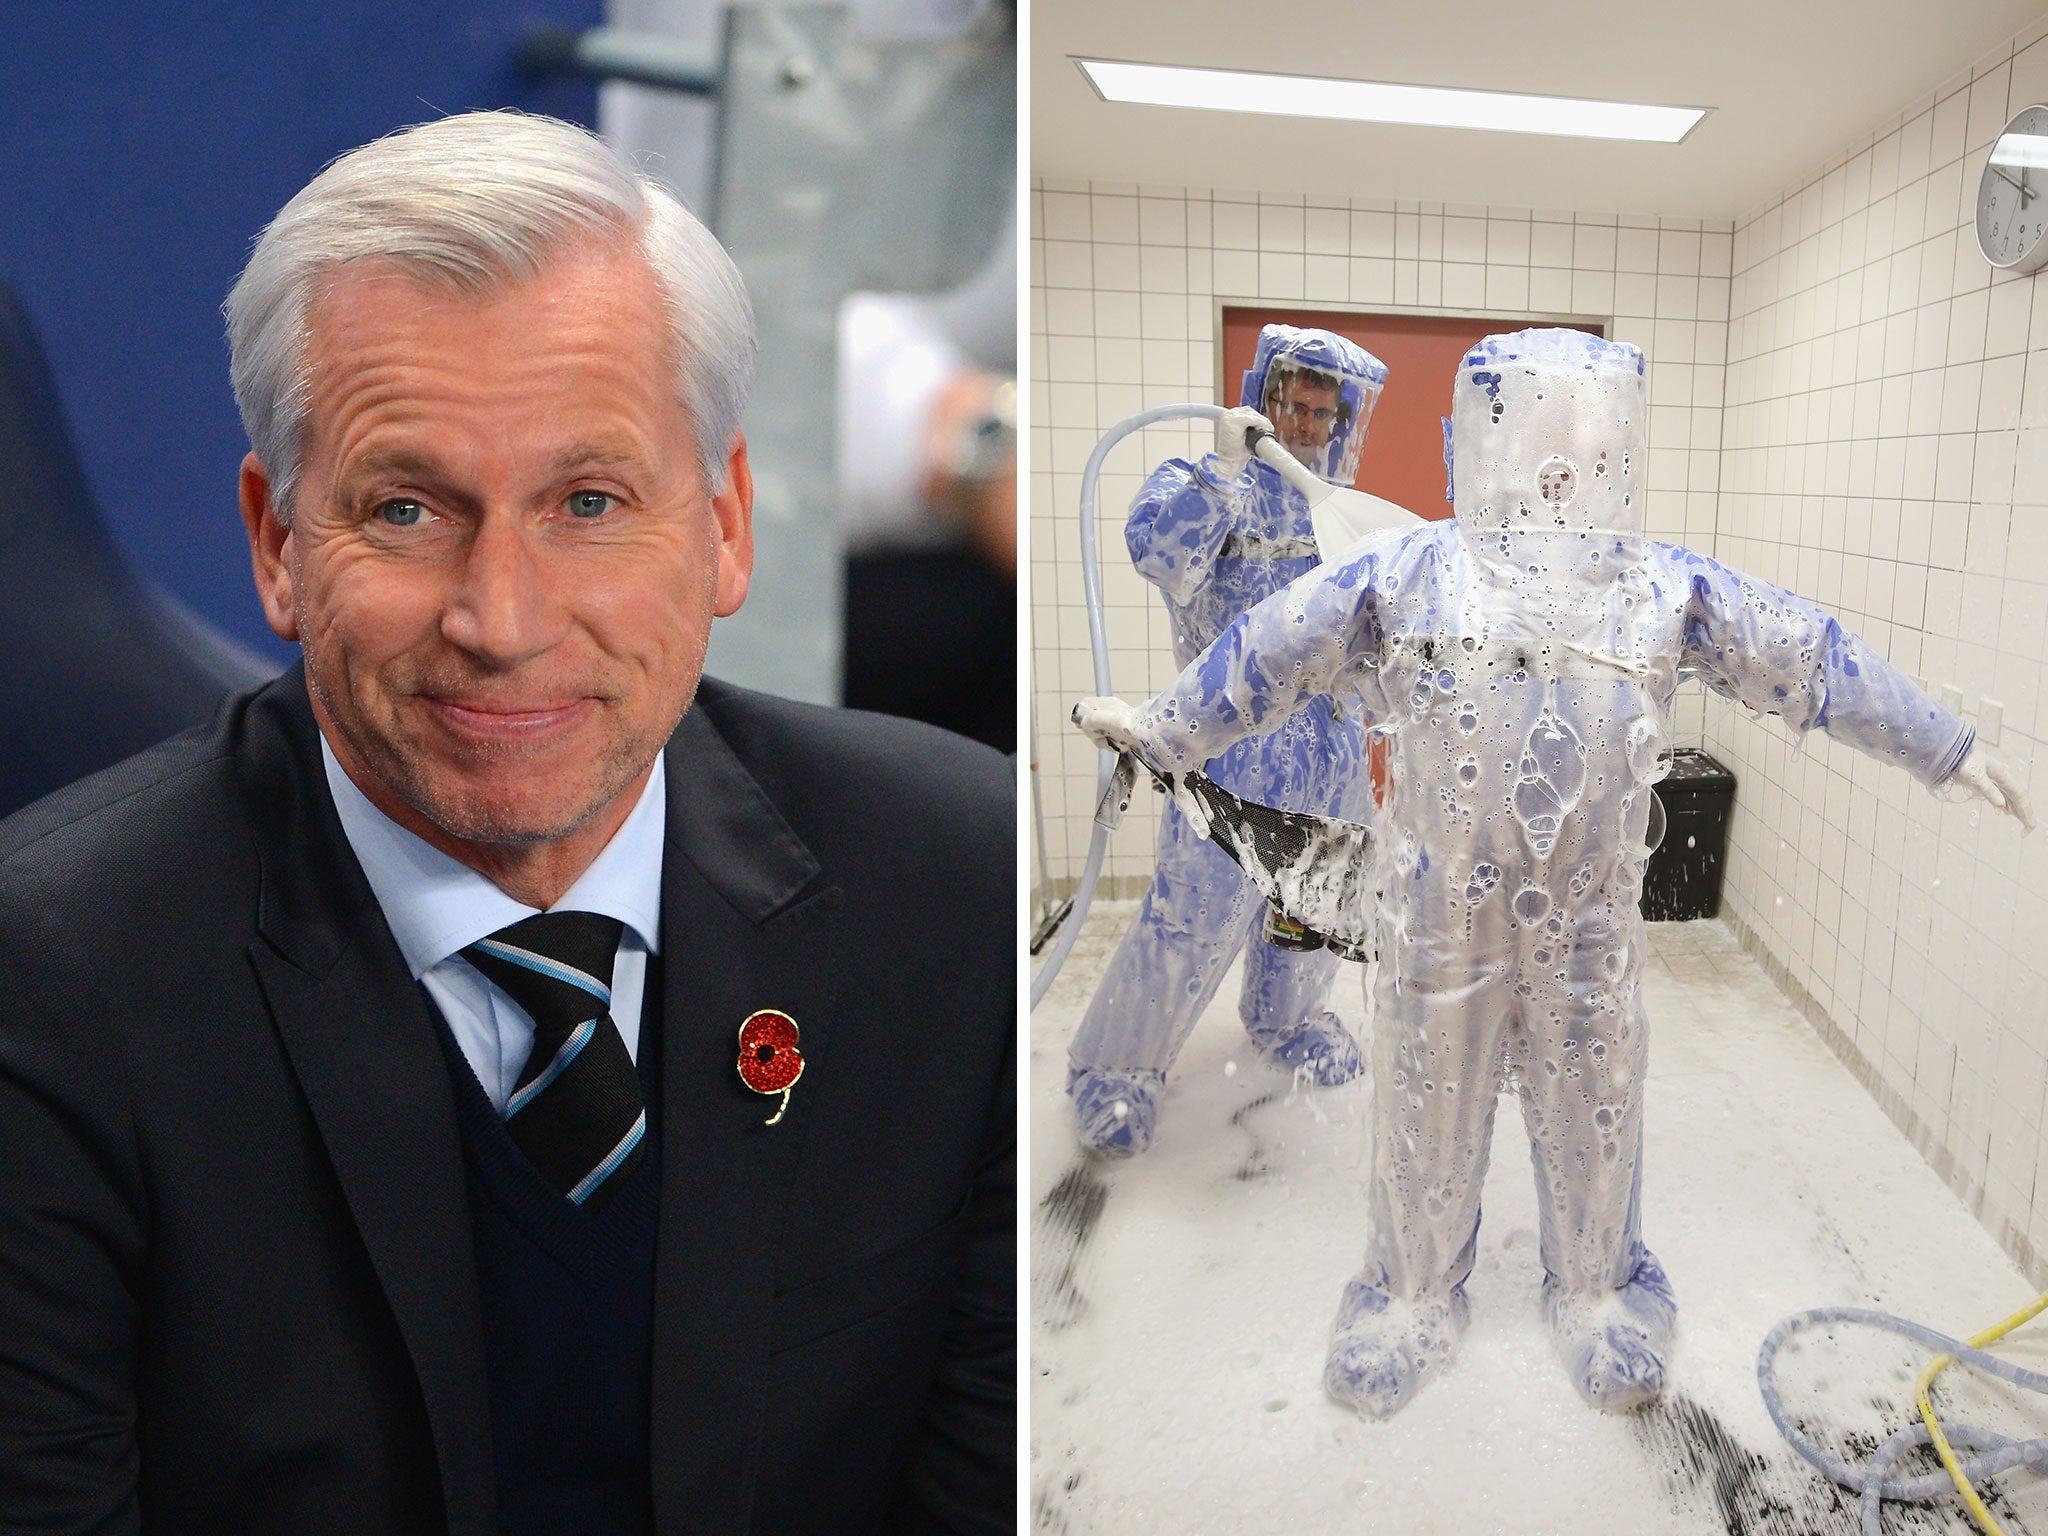 Alan Pardew was interrupted by an Ebola warning message